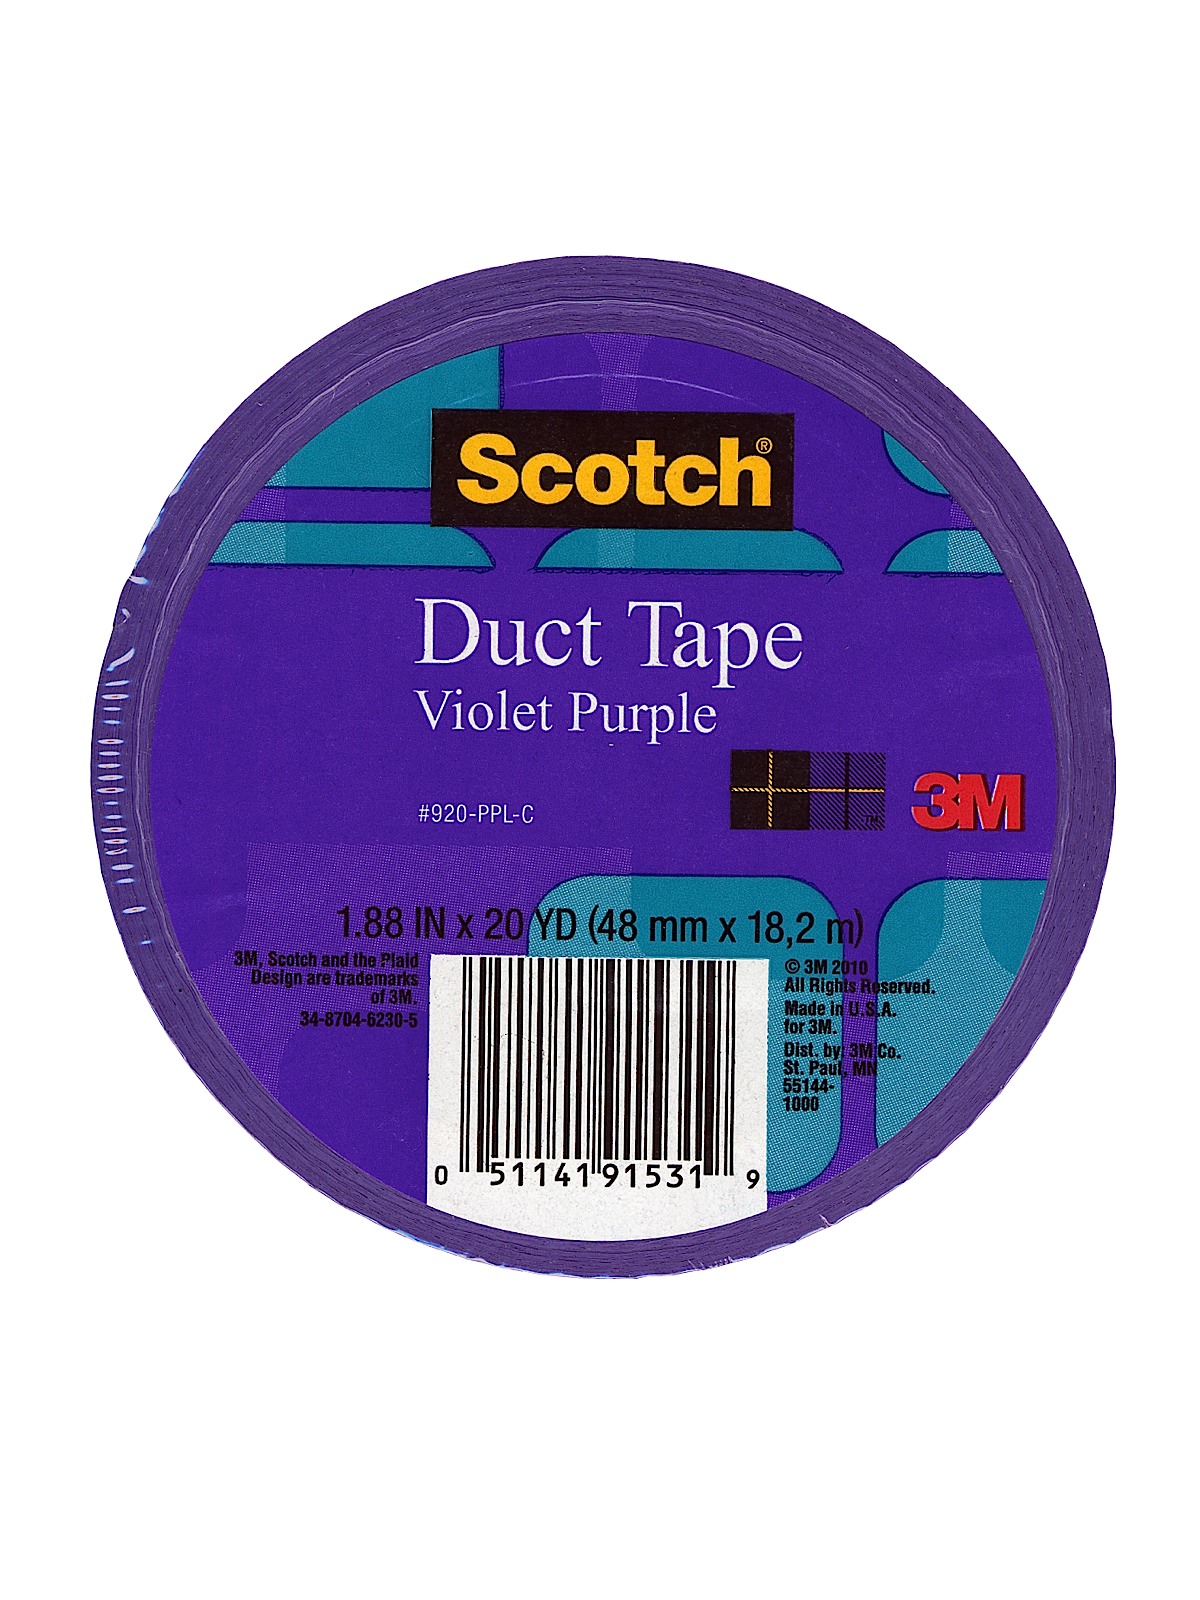 Colored Duct Tape Violet Purple 1.88 In. X 20 Yd. Roll 920-PPL-C